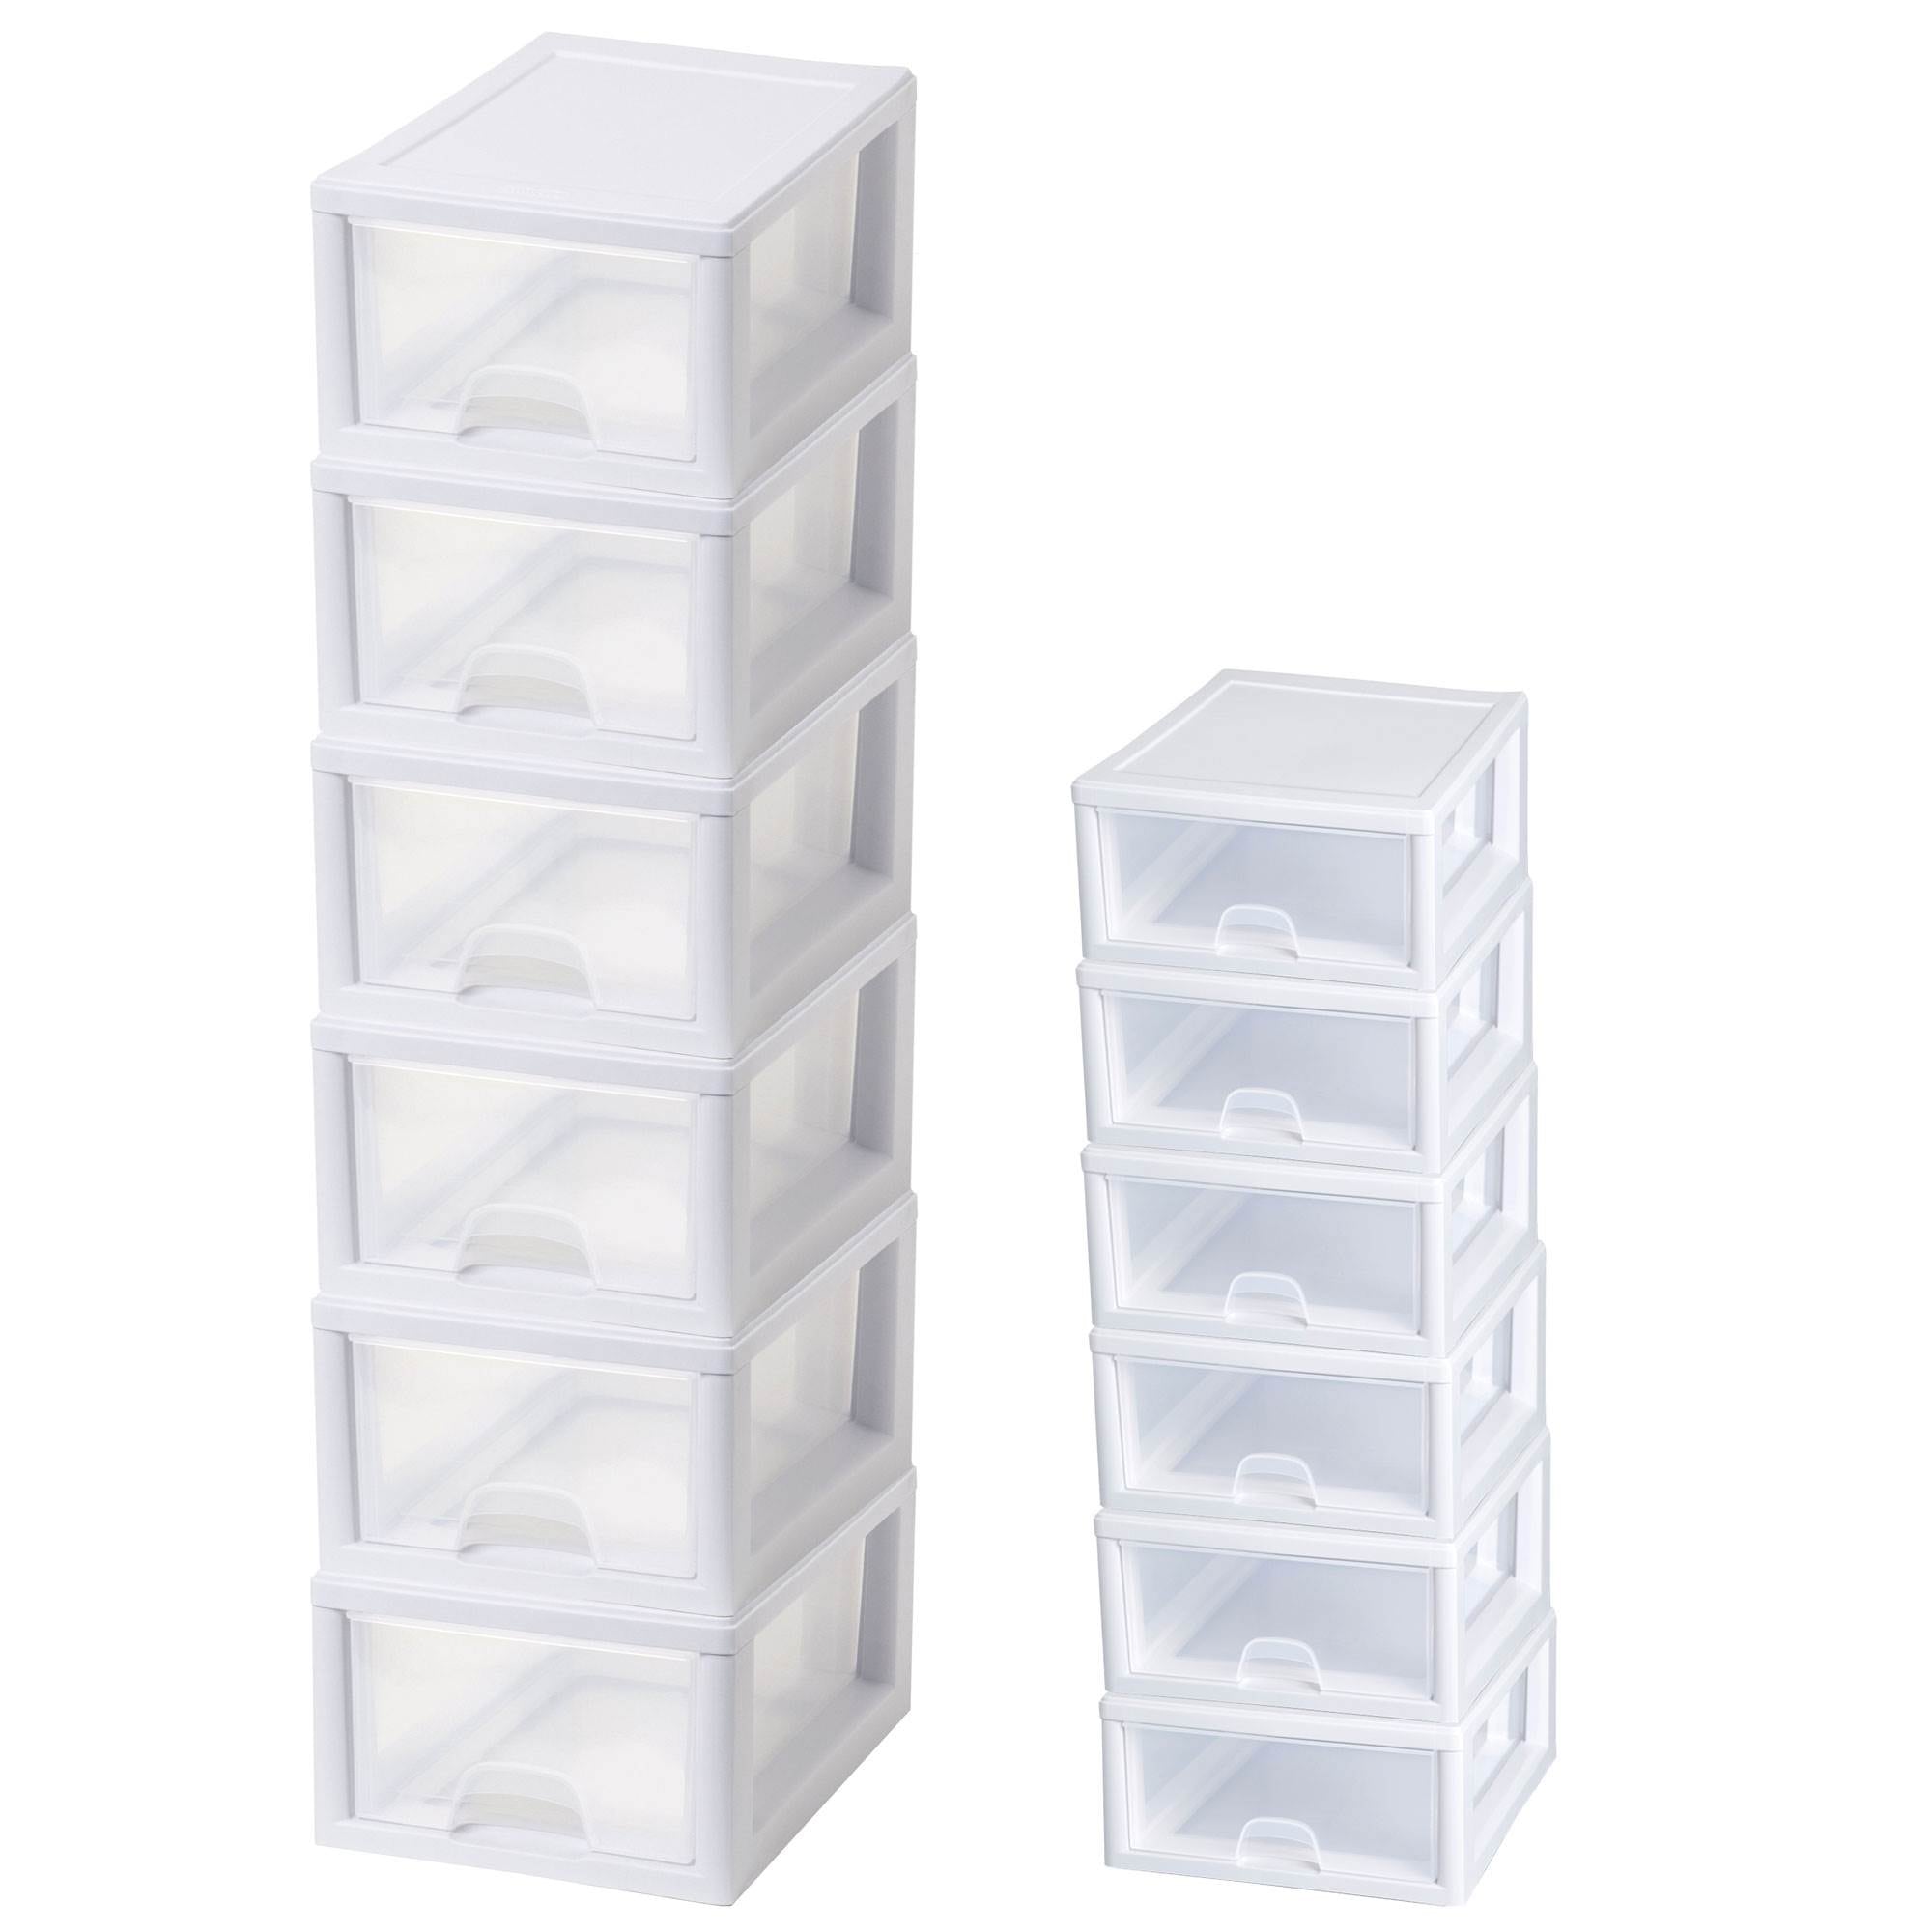 https://ak1.ostkcdn.com/images/products/is/images/direct/38f6c8380fc78be8e990de60372a4a128a1b469a/Sterilite-16-Qt-Clear-Stacking-Storage-Drawer-Container-%286-Pack%29-%2B-6-Qt-%286-Pack%29.jpg